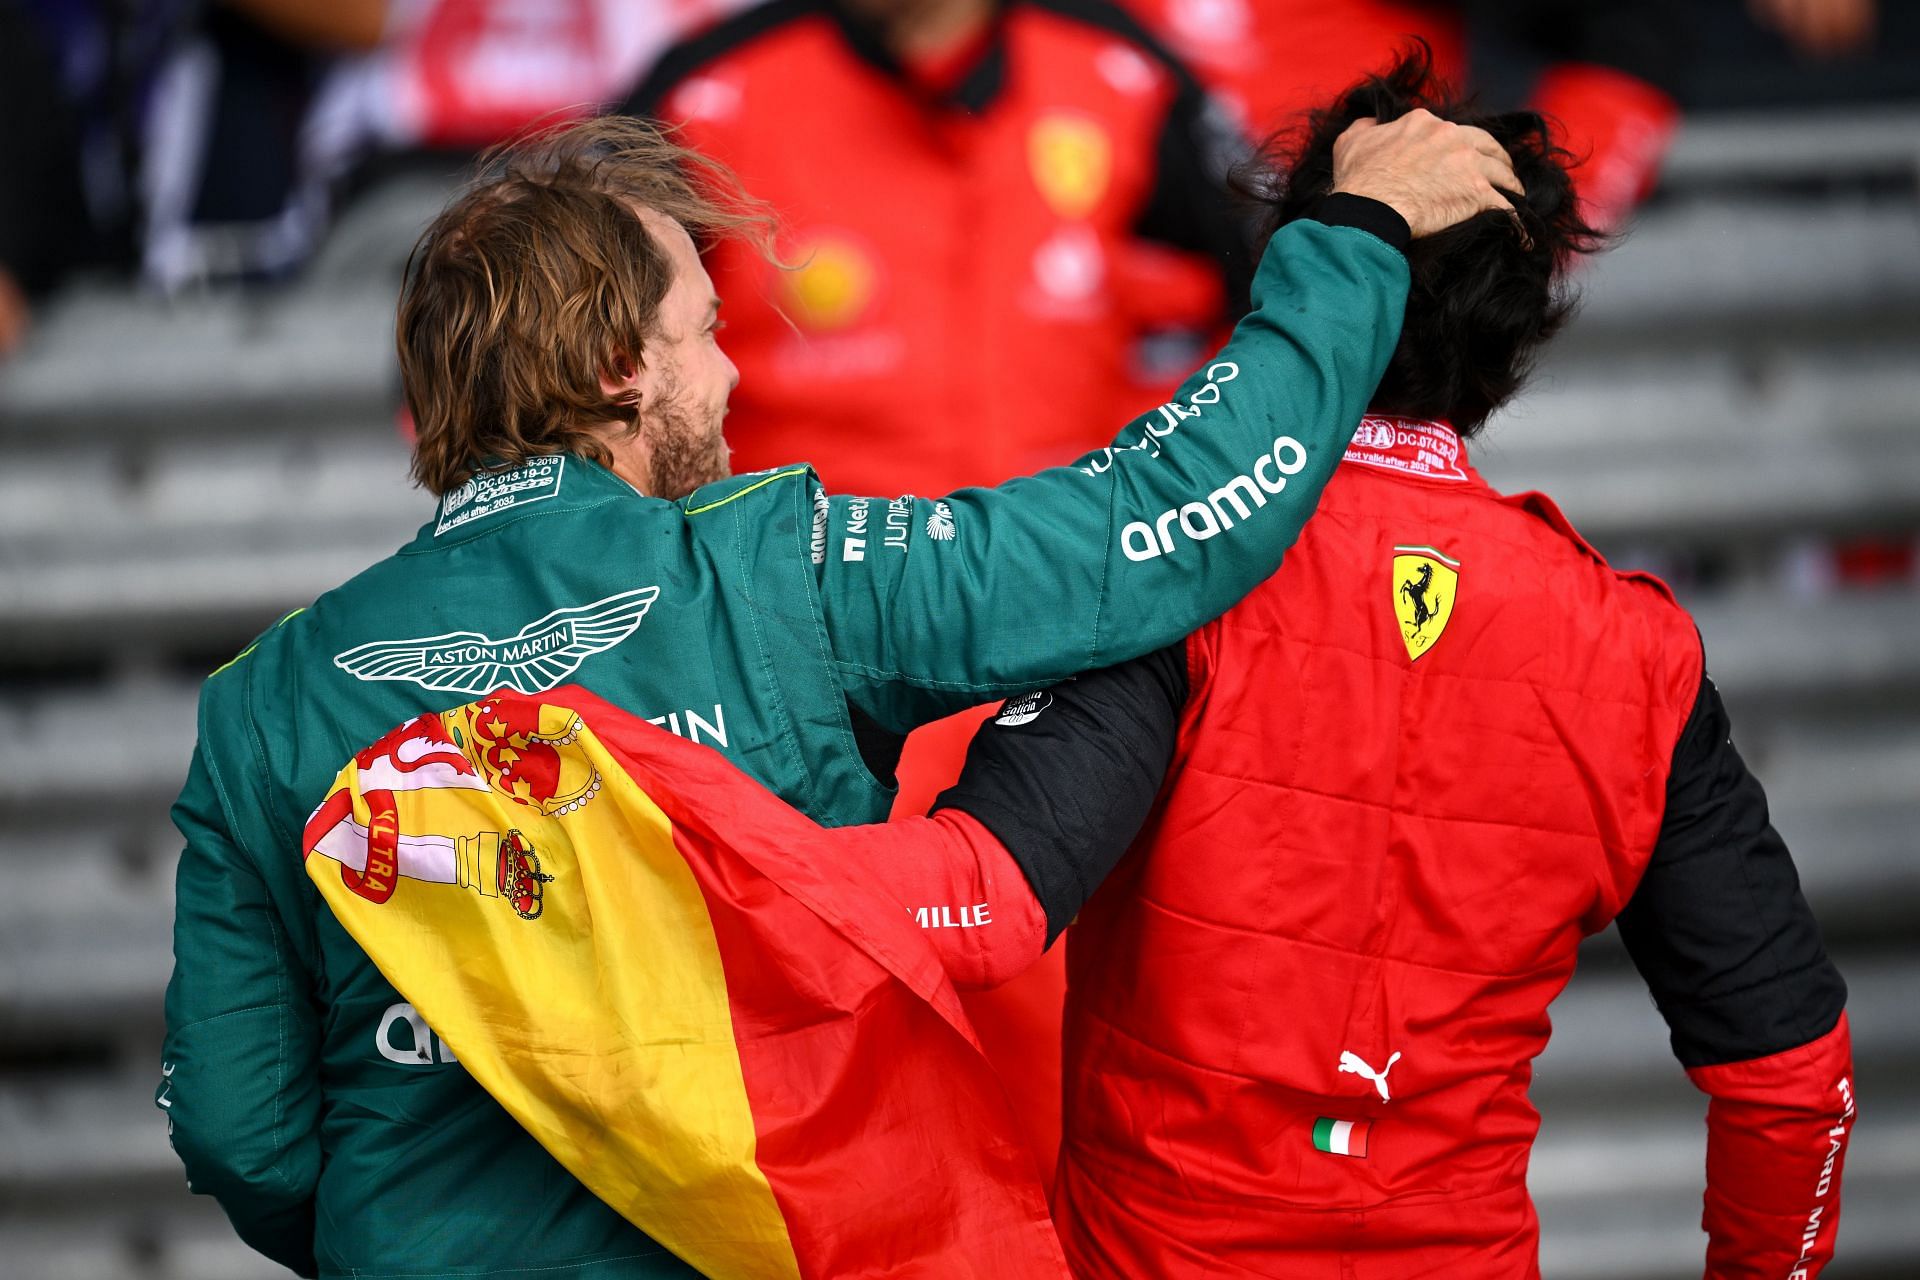 Sebastian Vettel congratulates Race winner Carlos Sainz in parc ferme during the F1 Grand Prix of Great Britain at Silverstone in Northampton, England. (Photo by Clive Mason/Getty Images)